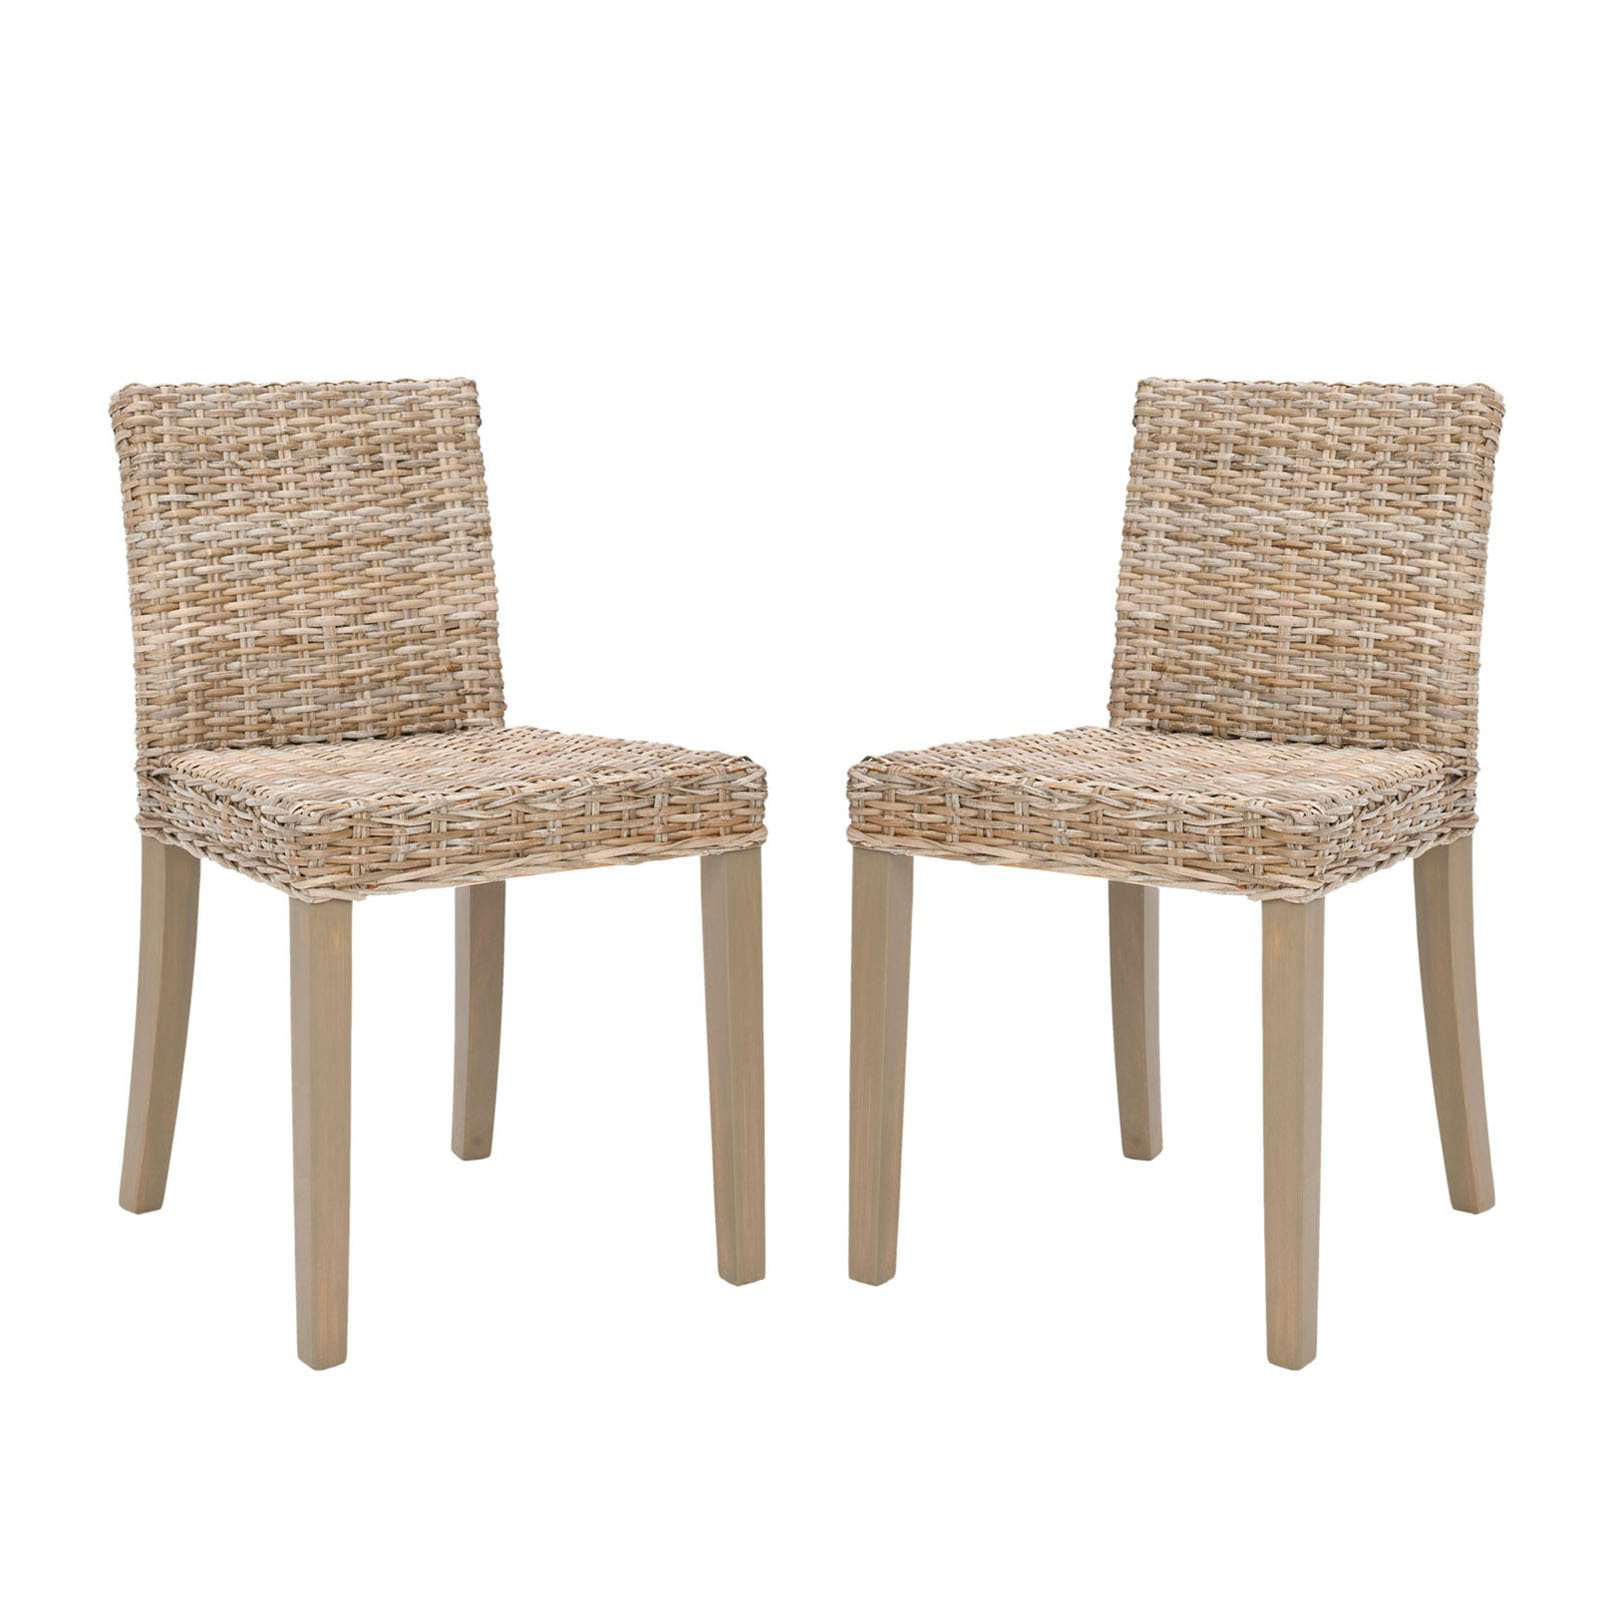 Safavieh Charlotte Wicker Dining Side Chairs - Chic Gray - Set of 2